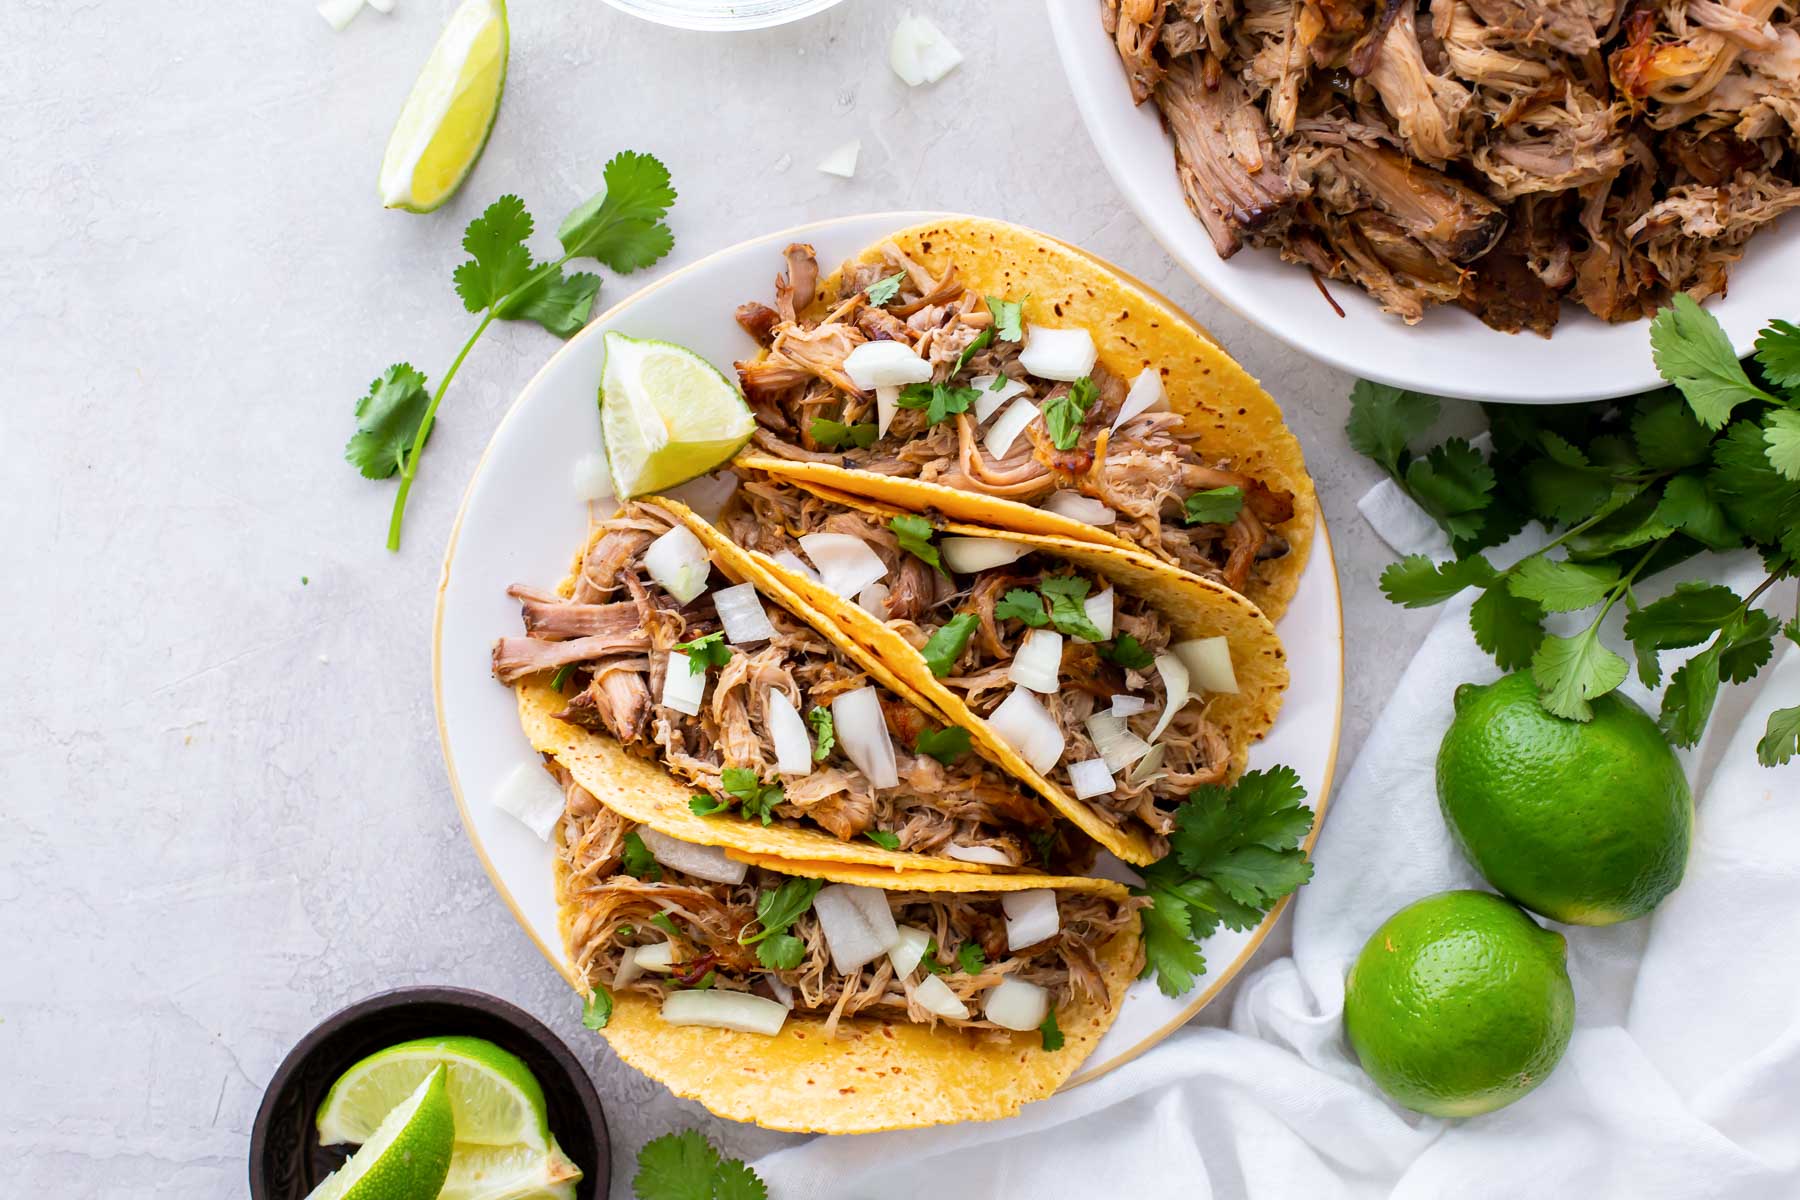 Four carnitas tacos on a plate with bowl of carnitas in background.